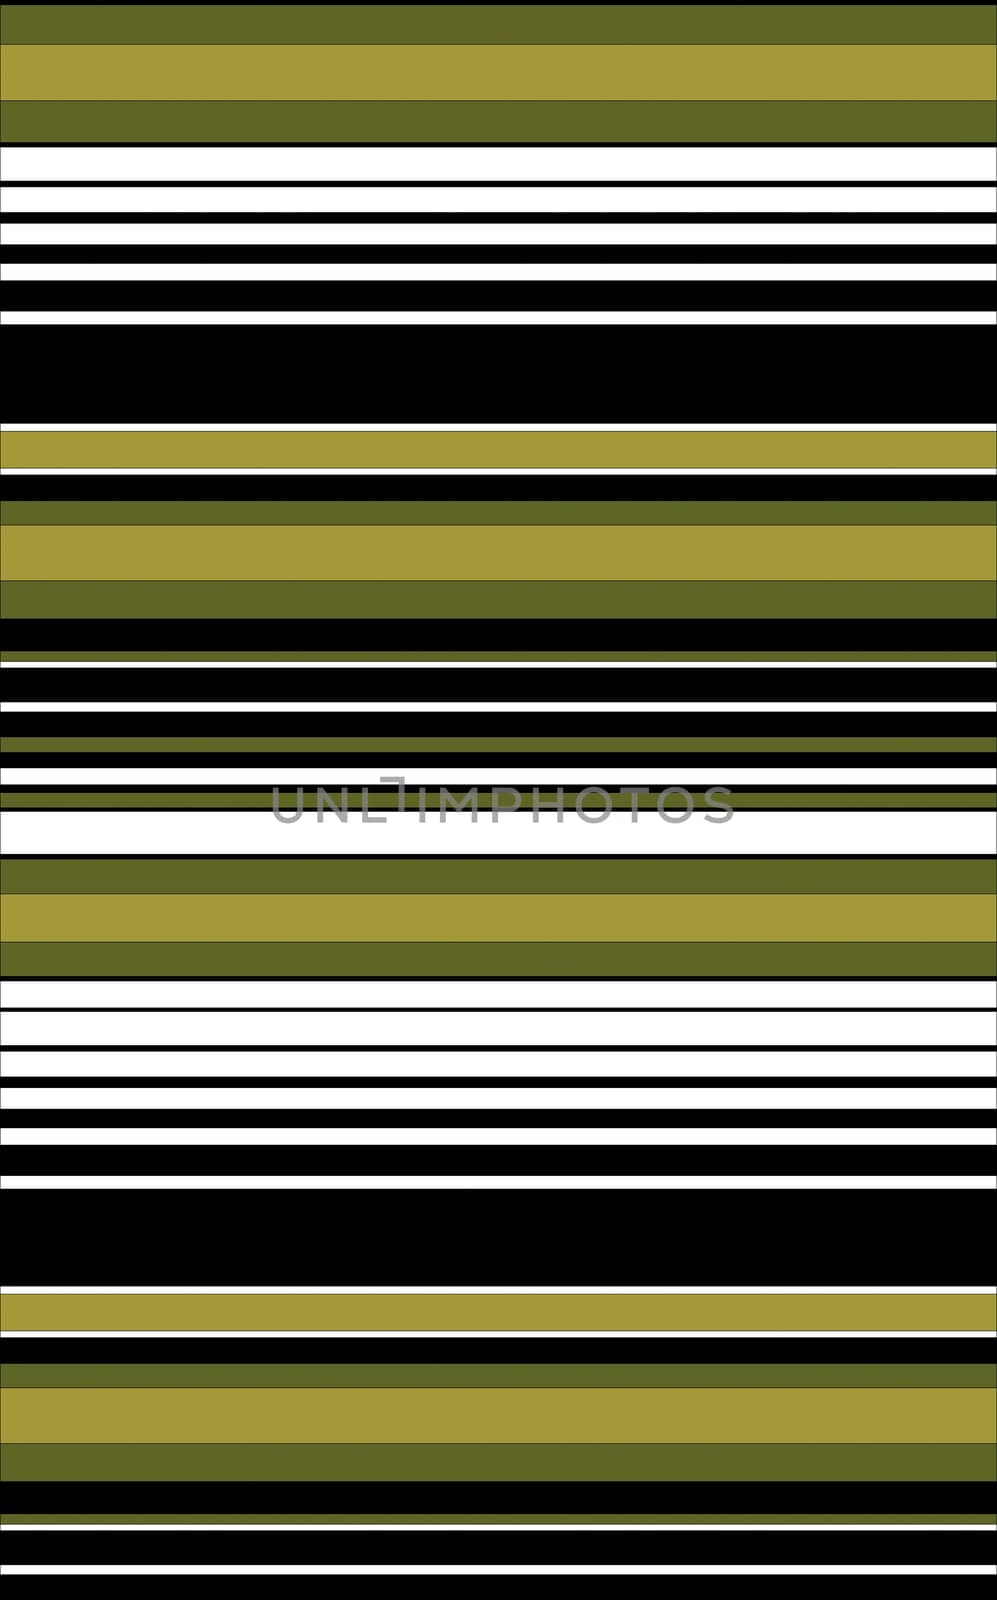 abstract green lines background parallel stripes pattern